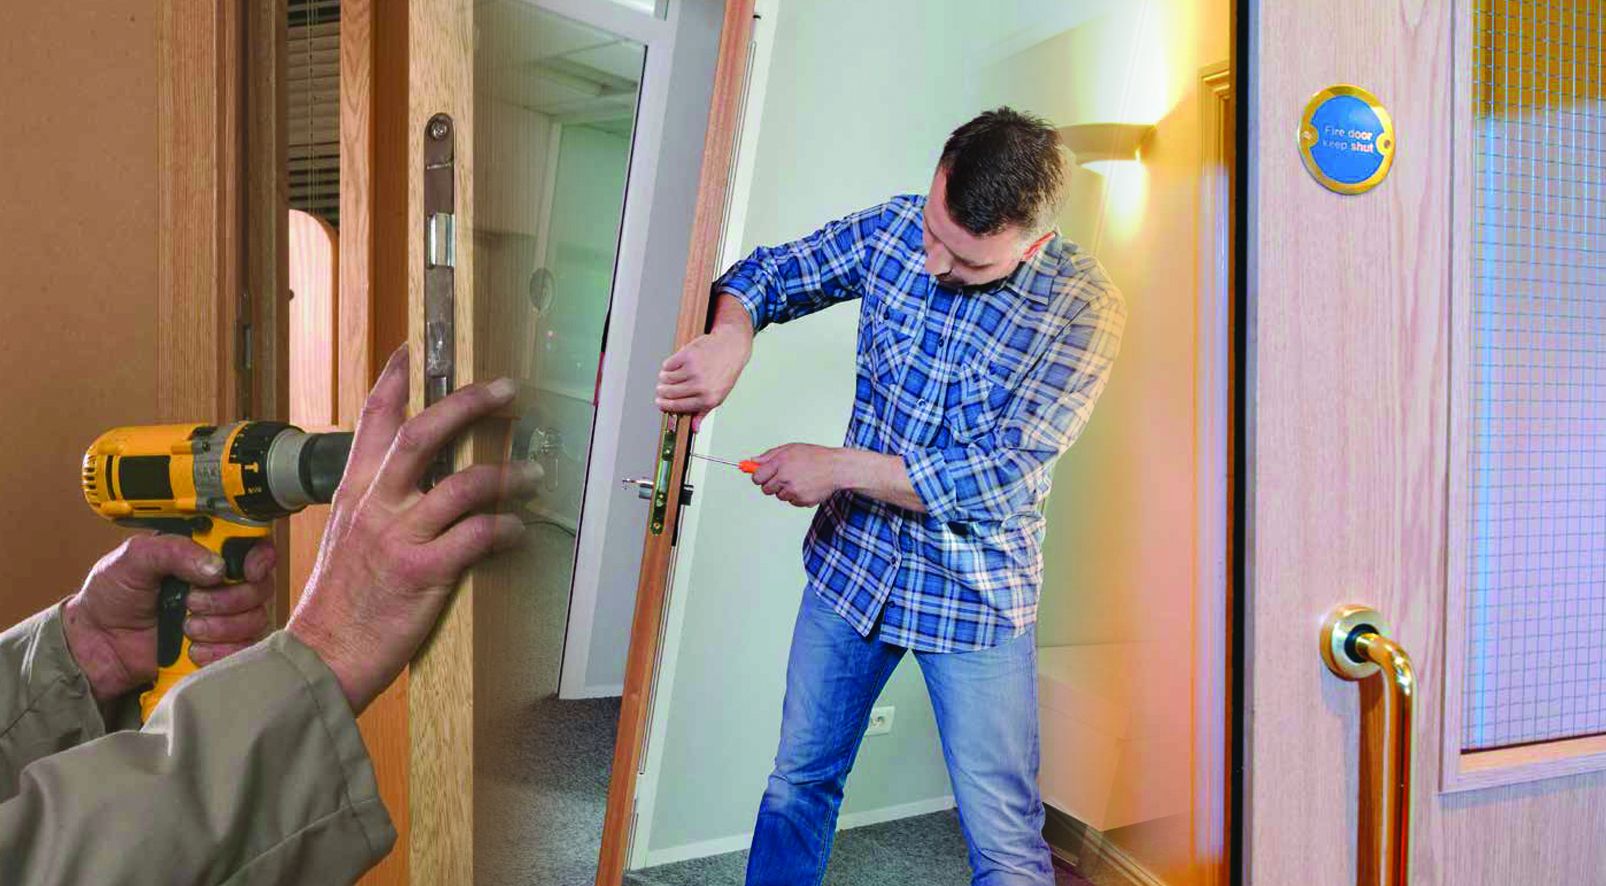 Fire door safety campaigners stepping up the first line of defence